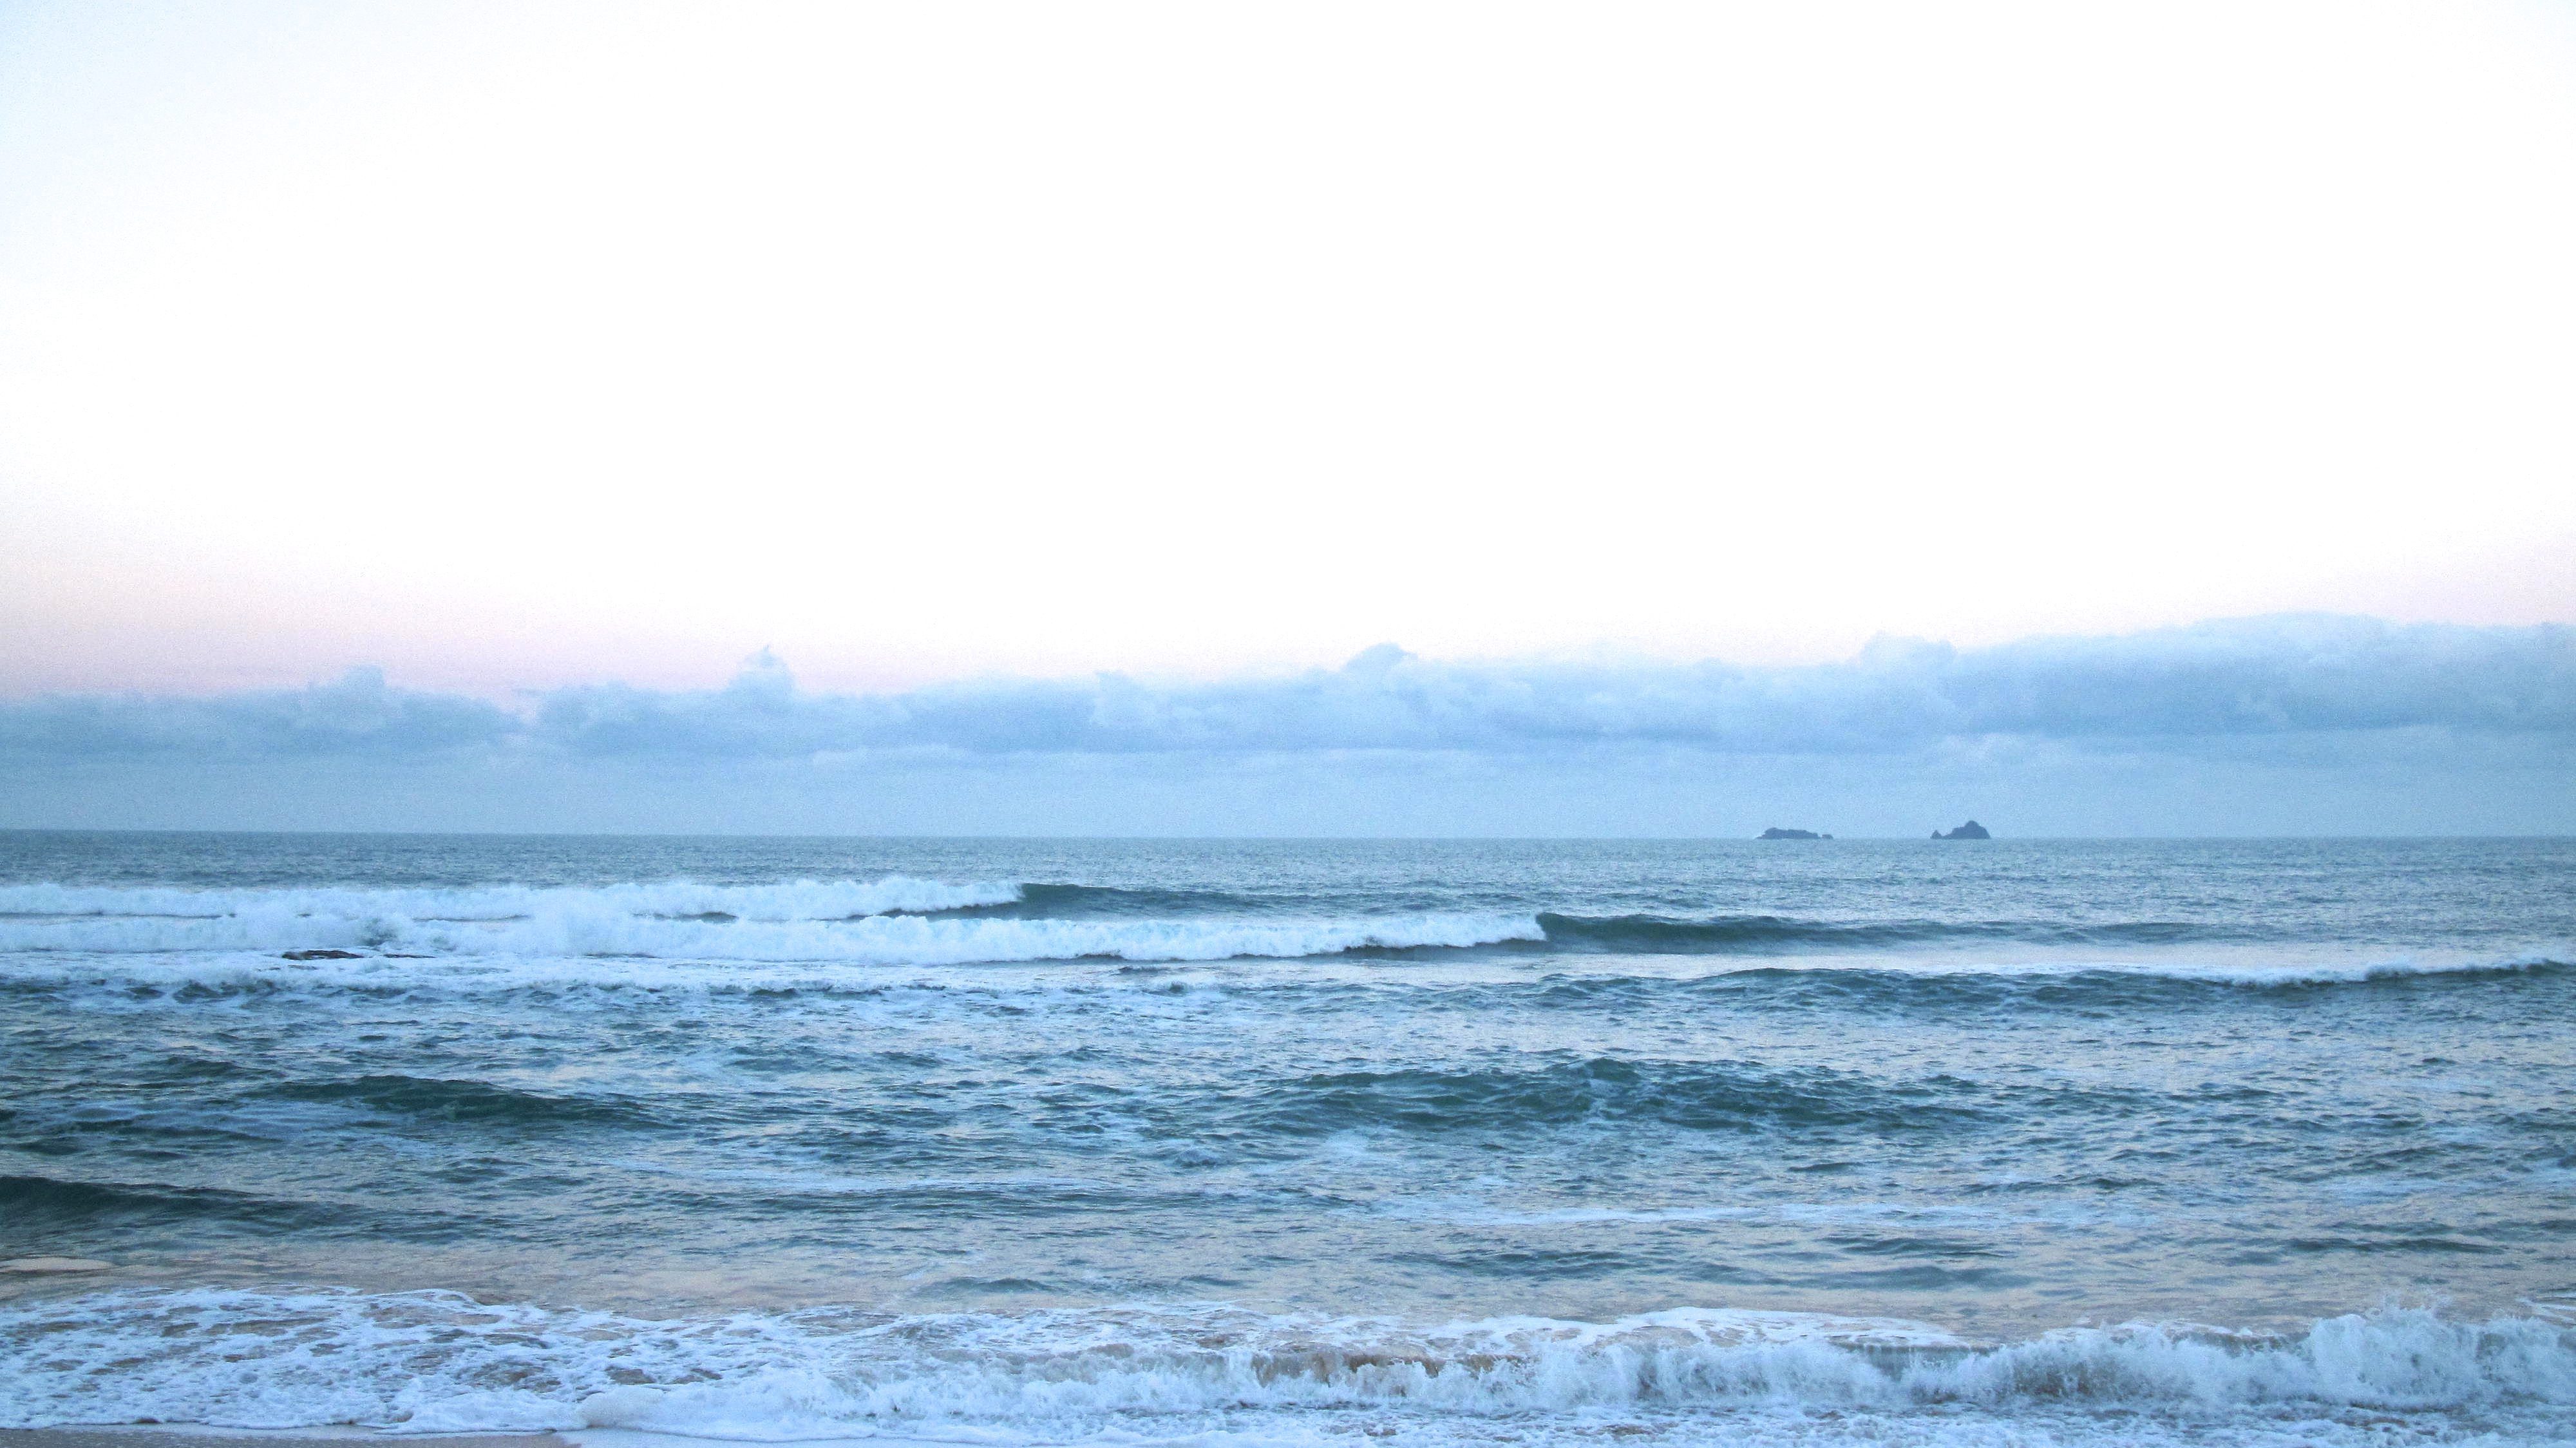 Surf Report for Friday 23rd January 2015